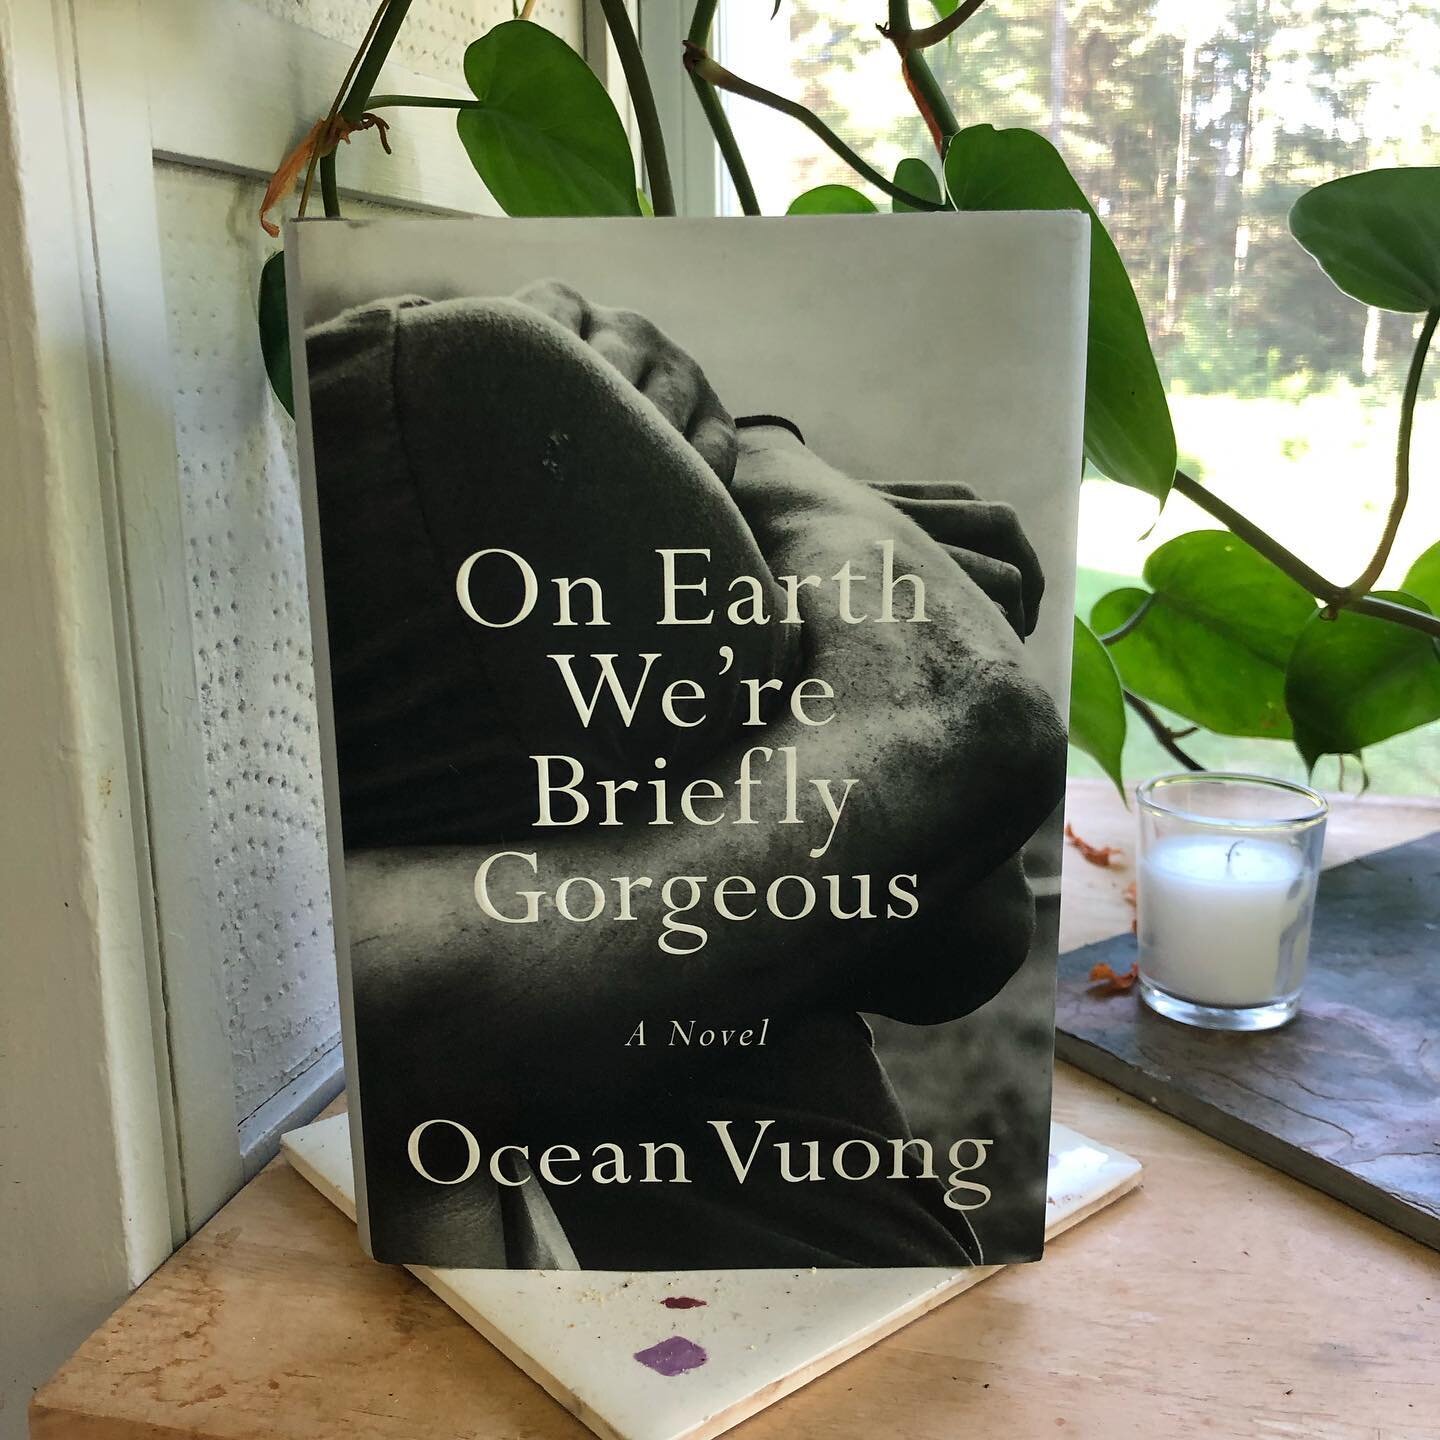 &ldquo;I never wanted to build a &lsquo;body of work,&rsquo; but to preserve these, our bodies, breathing and unaccounted for, inside the work.&rdquo; &mdash;Ocean Vuong

For anyone who loves gorgeous writing and stories that sink deep into your bone